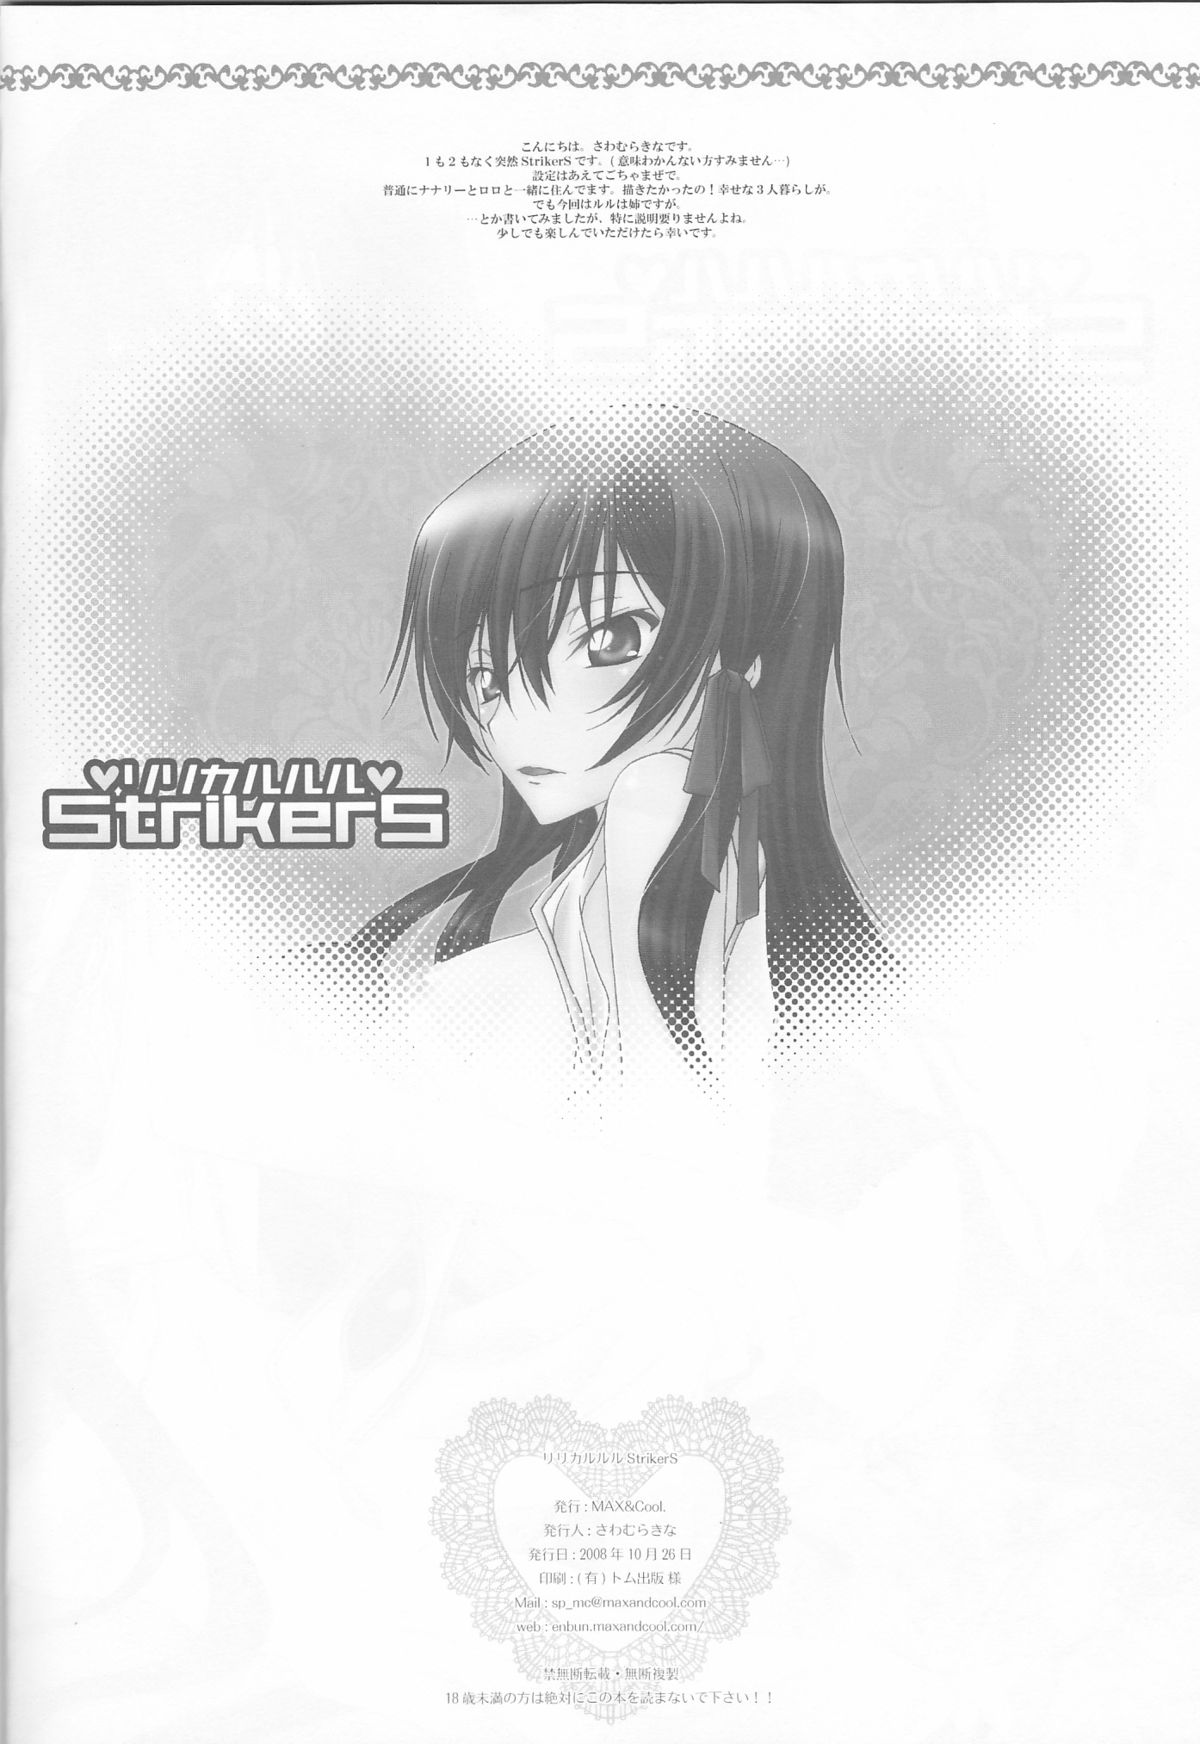 [MAX&COOL. (Sawamura Kina)] Lyrical Rule StrikerS (CODE GEASS: Lelouch of the Rebellion) page 4 full